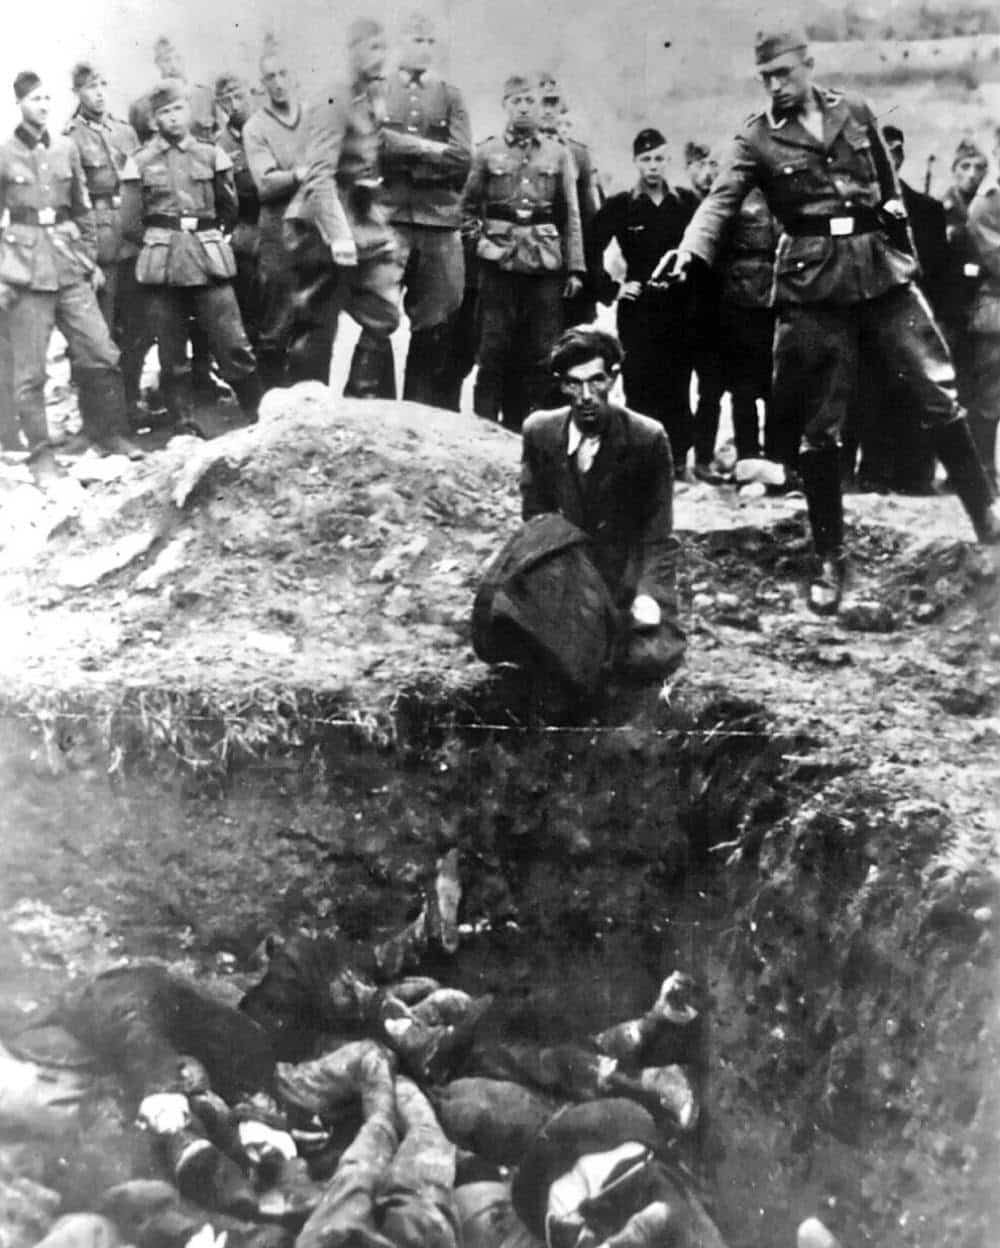 “The last Jew in Vinnitsa” – Member of Einsatzgruppe D (a Nazi SS death squad) is just about to shoot a Jewish man kneeling